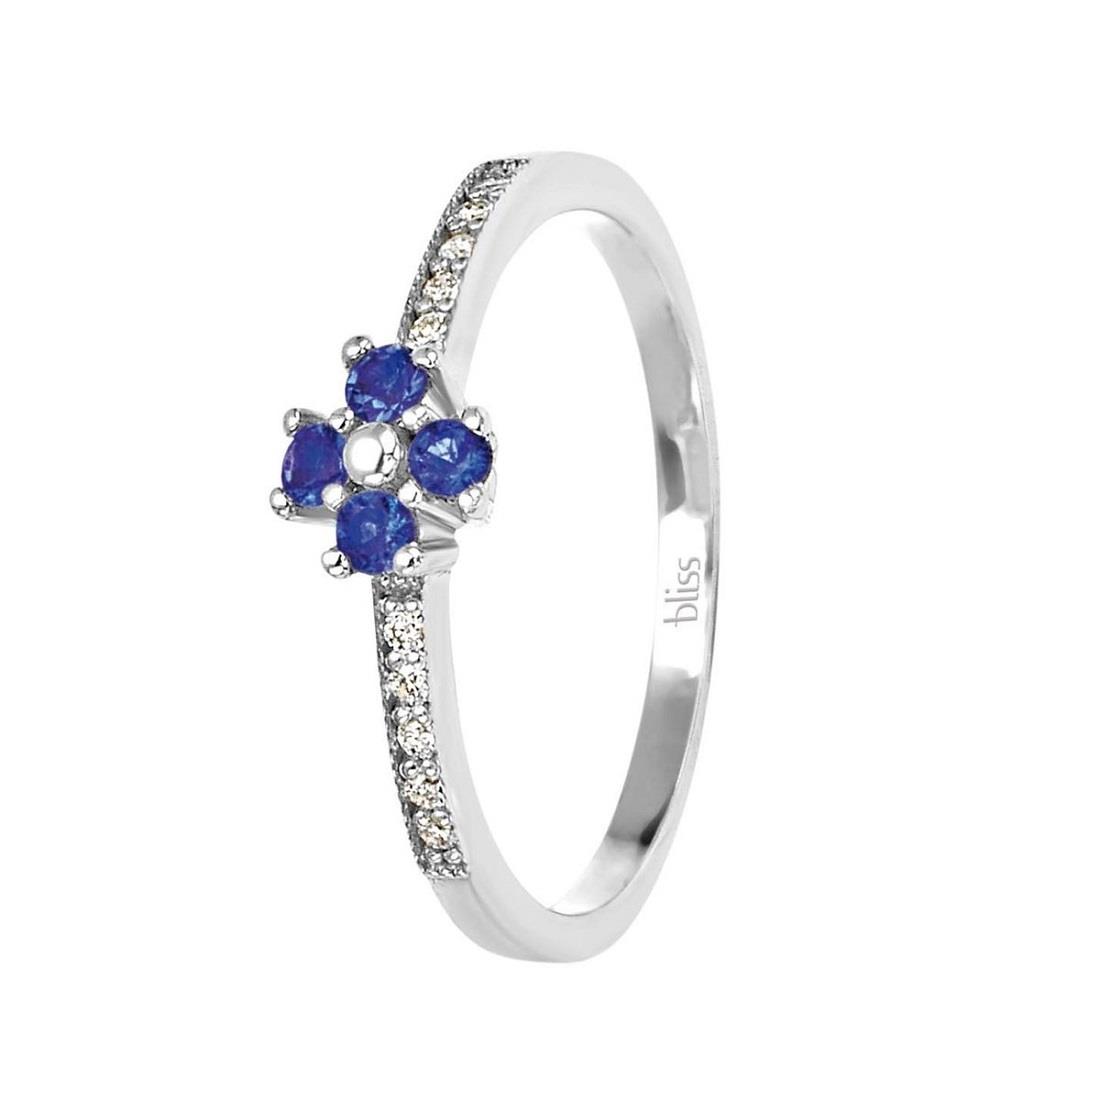 Gold ring with diamonds ct. 0.05 and sapphire flower ct. 0.16 - BLISS